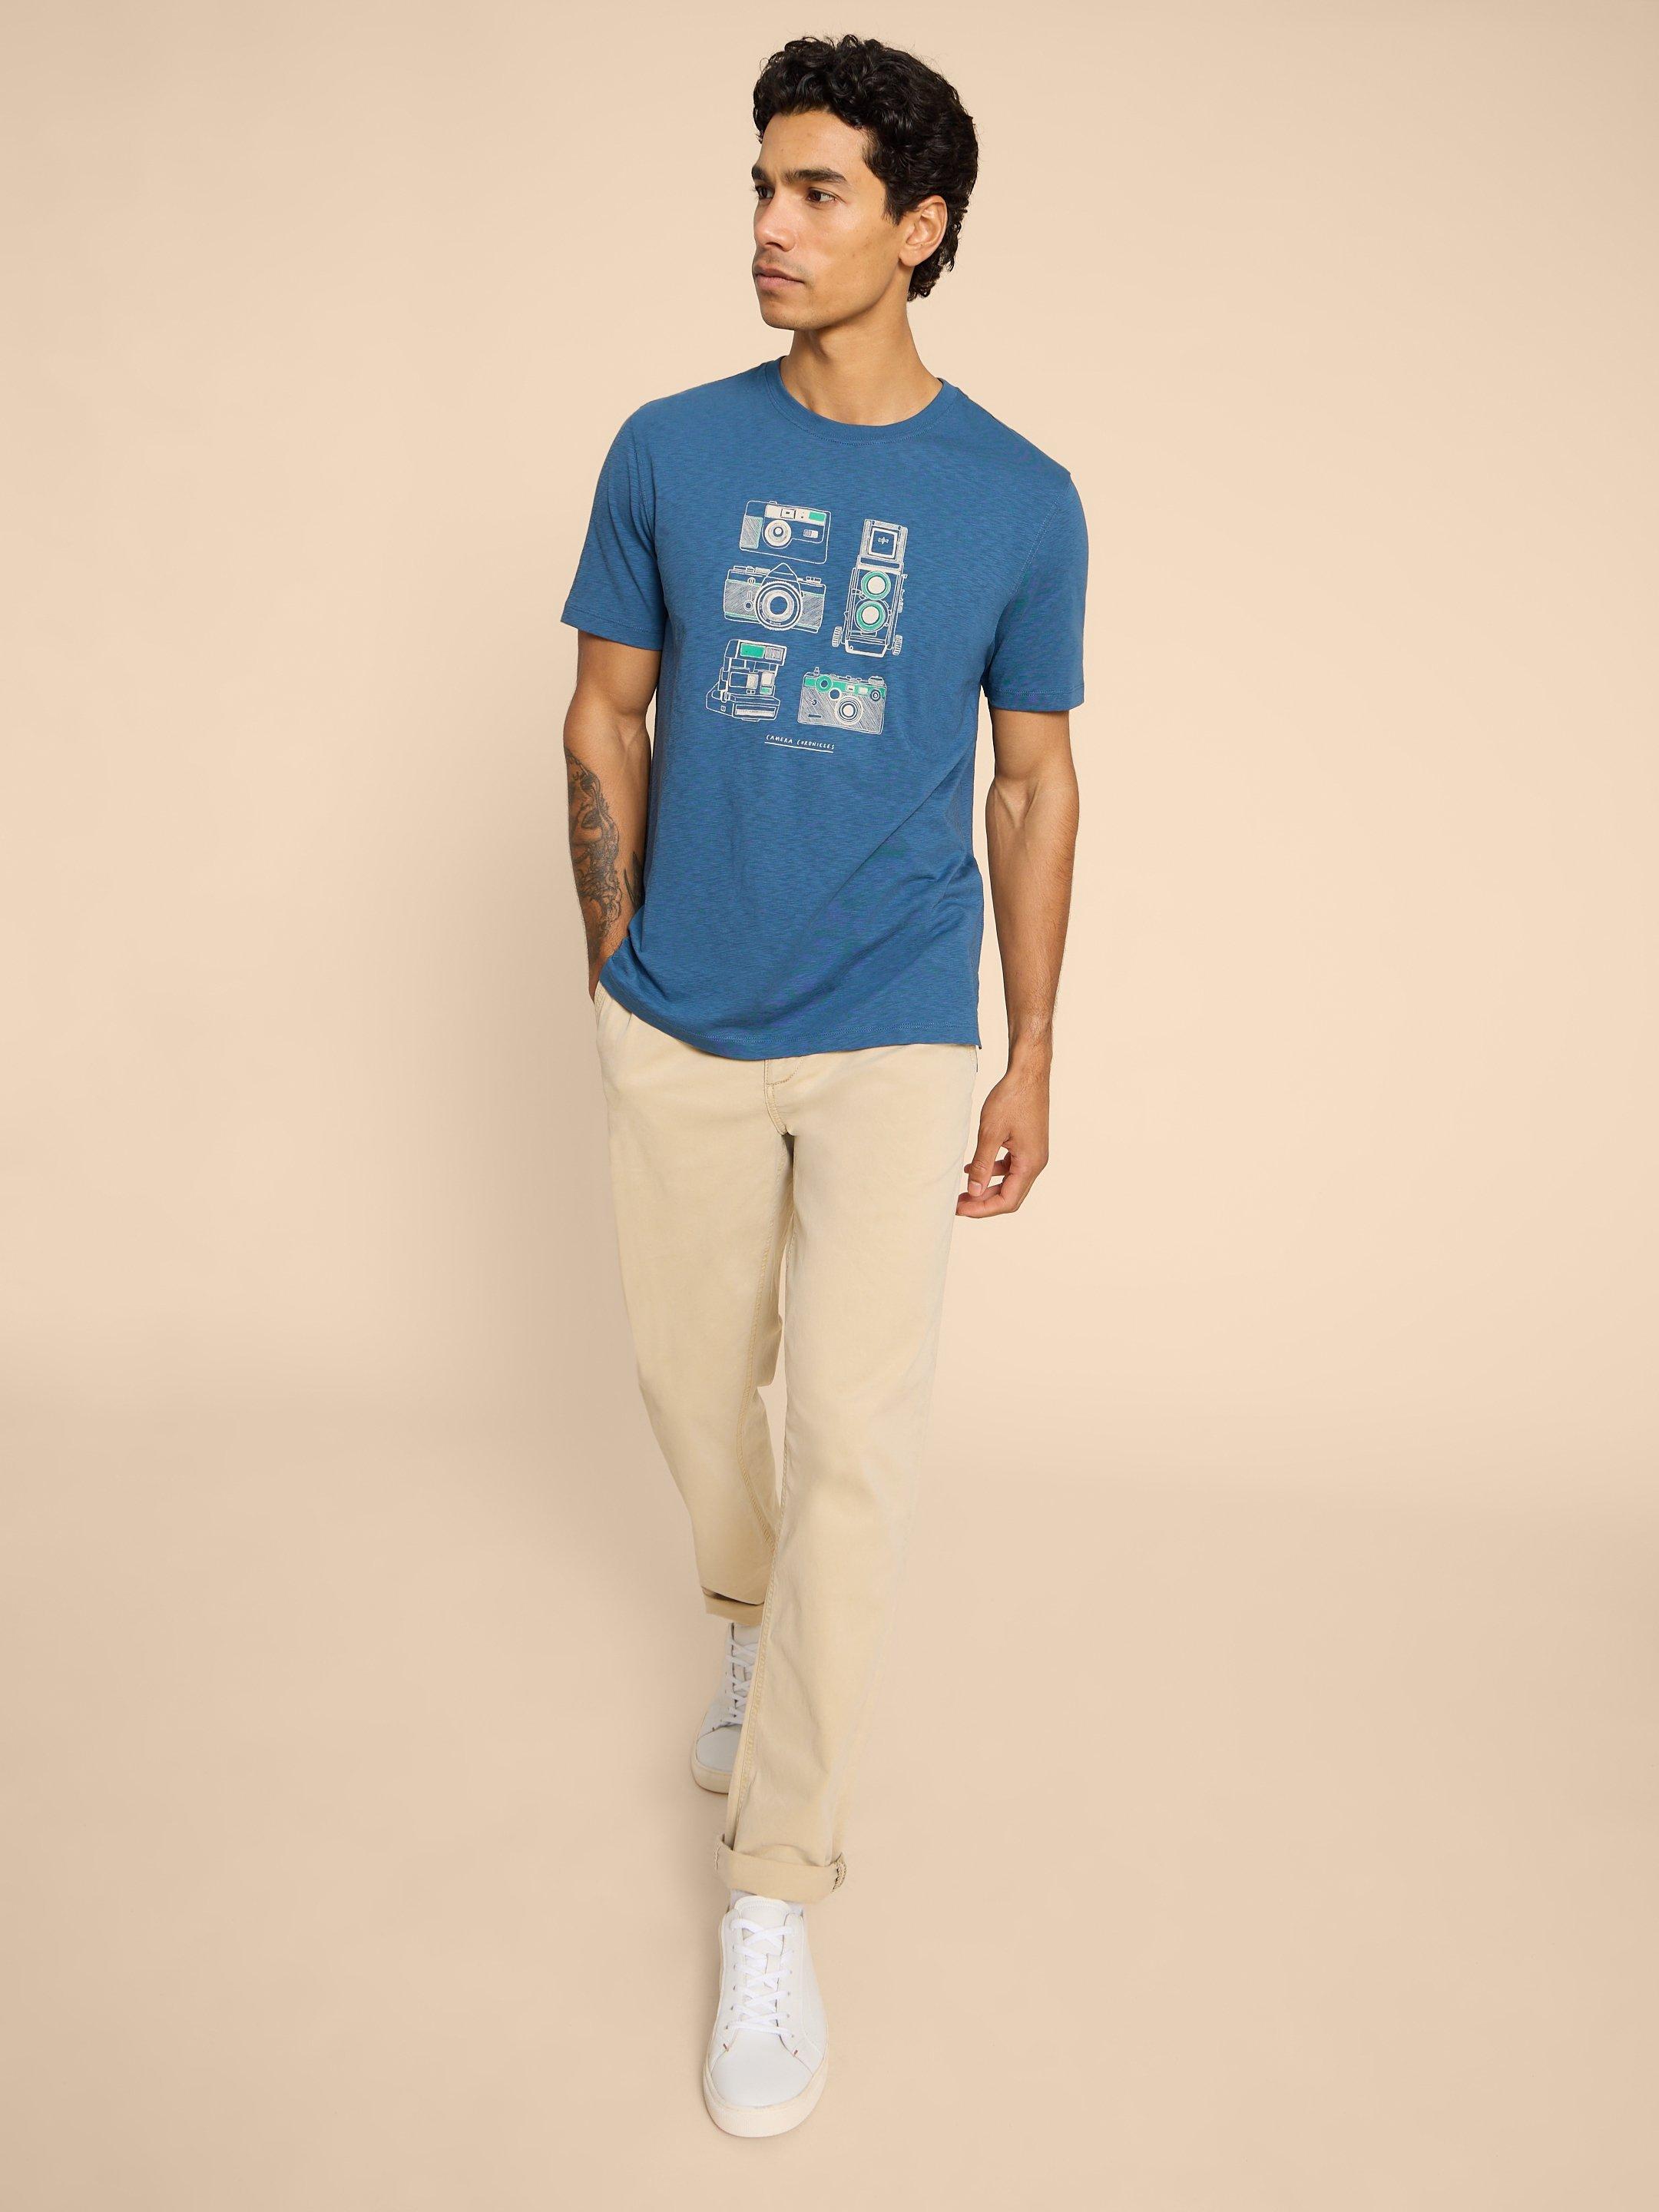 Camera Chronicles Graphic Tee in BLUE PR - LIFESTYLE